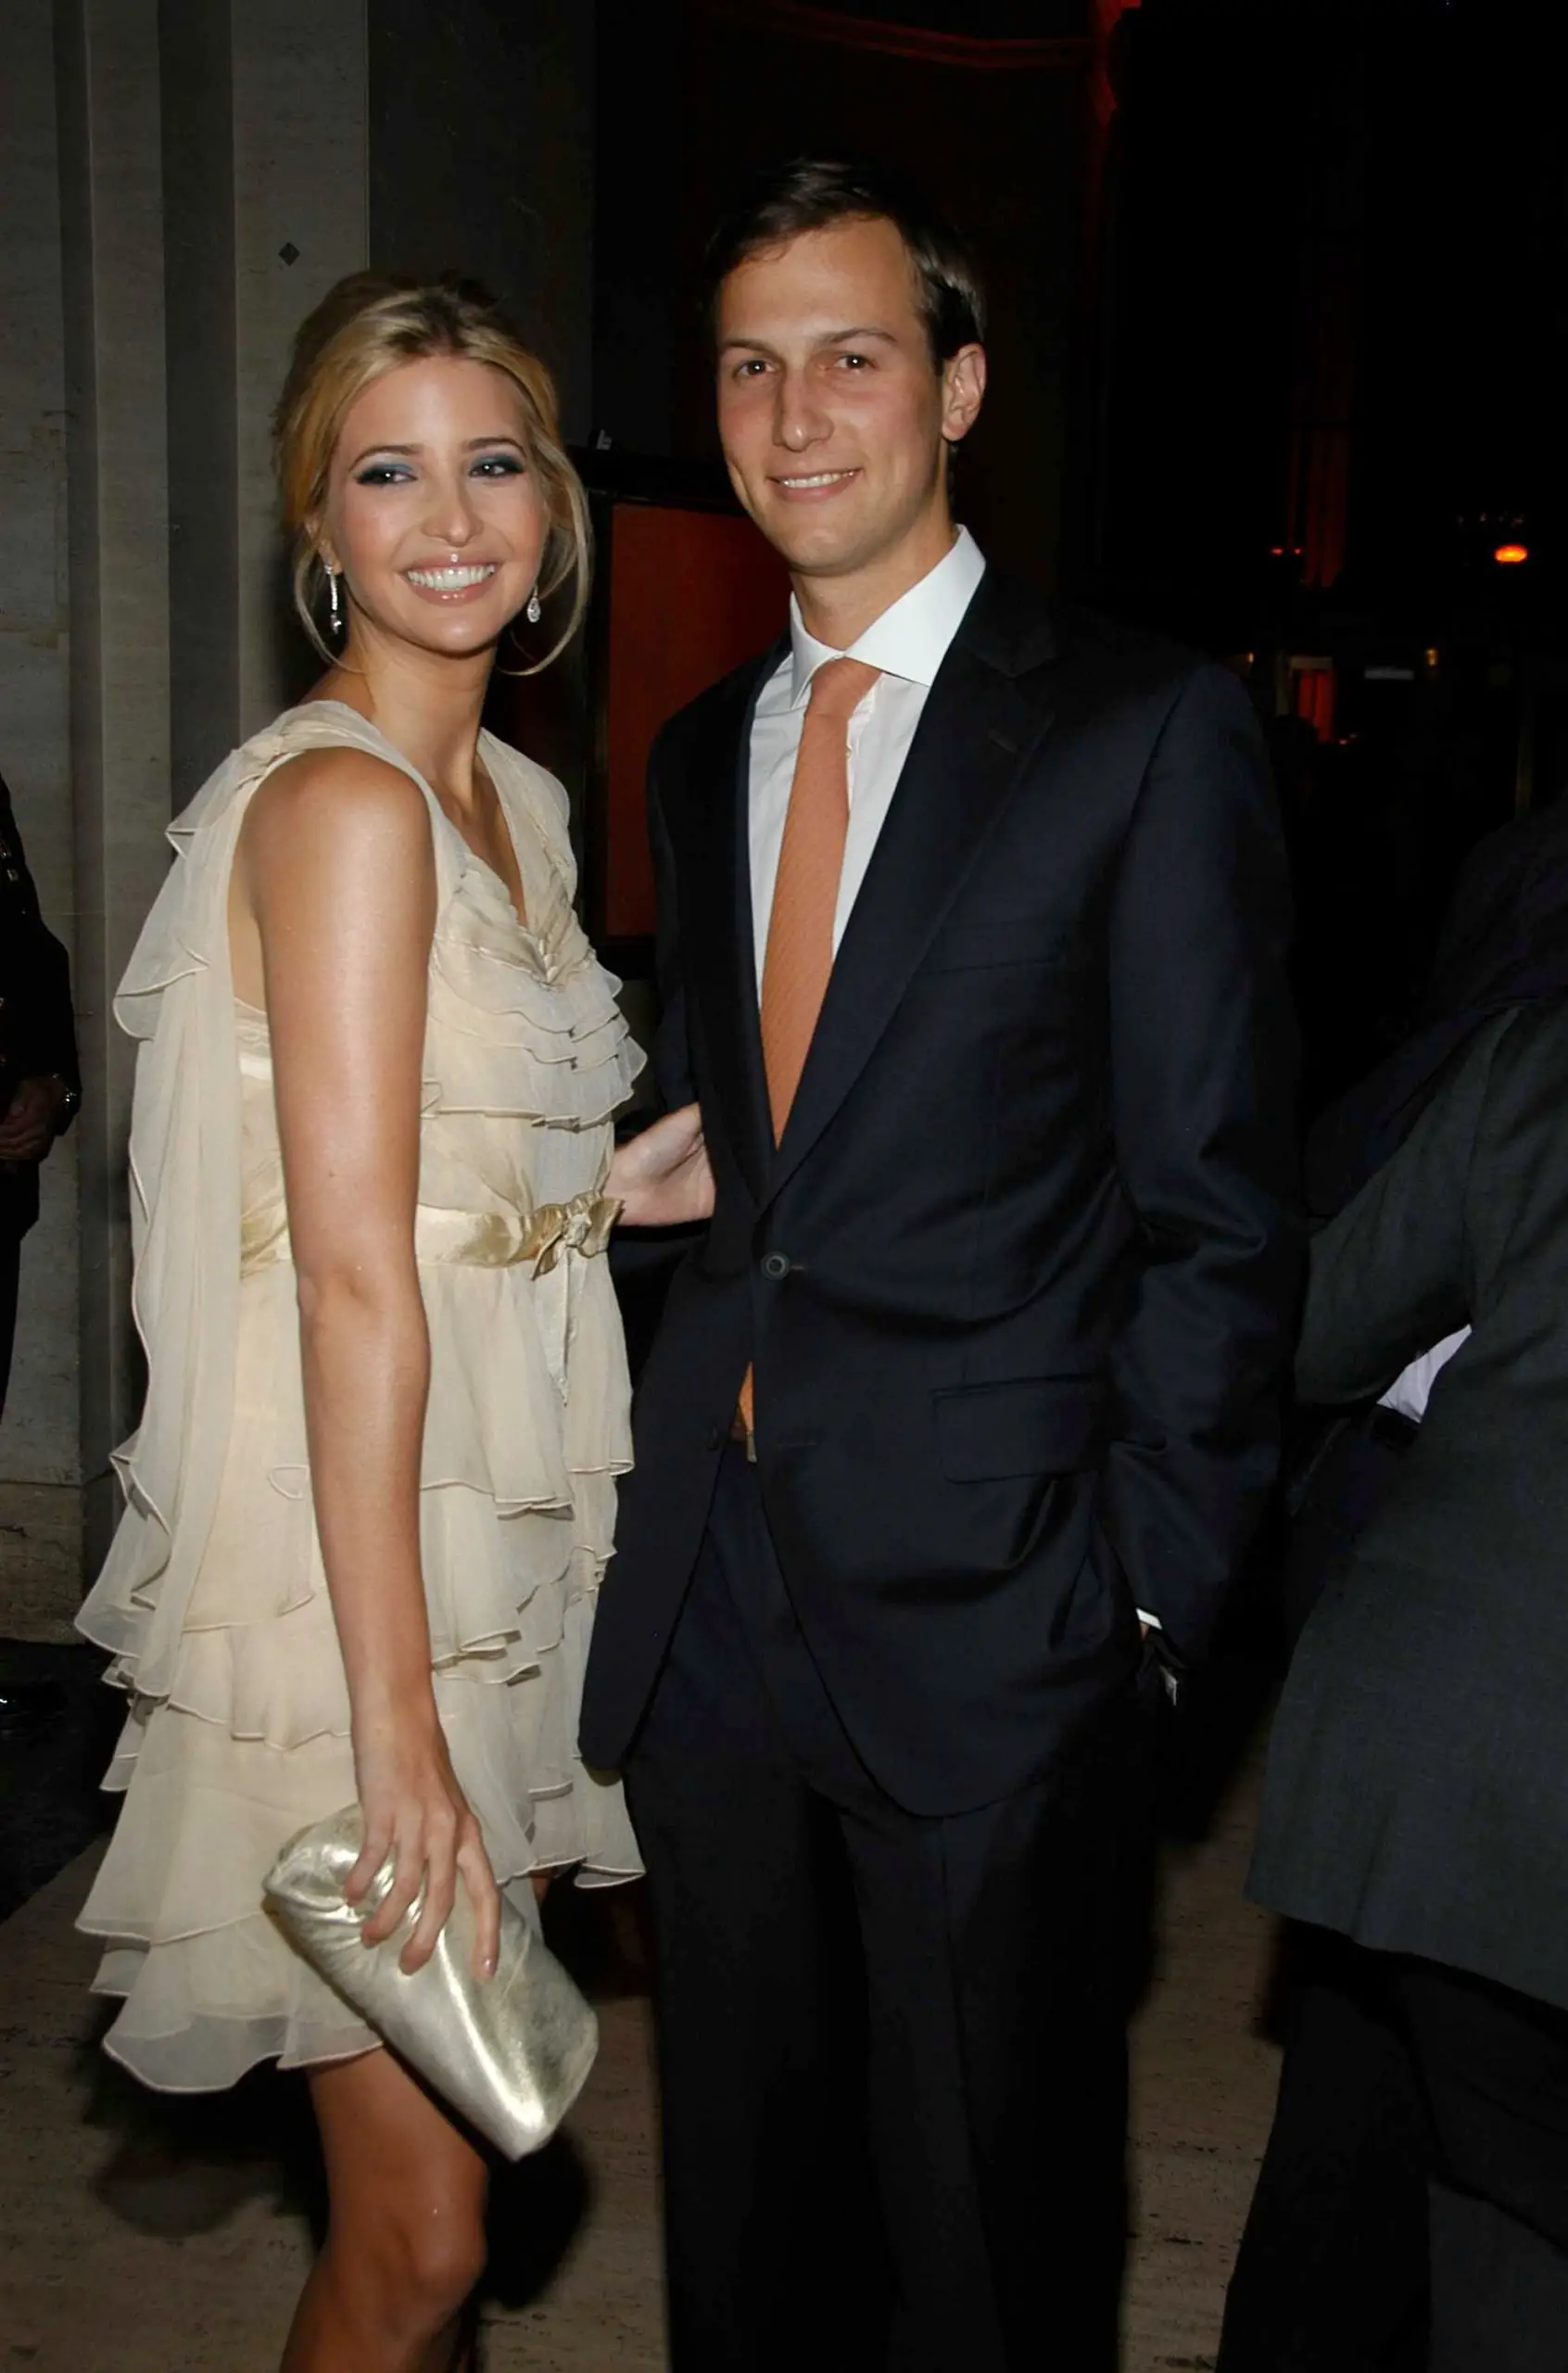 Destroyed By Ambition? Behind The Ivanka Trump and Jared Kushner ...